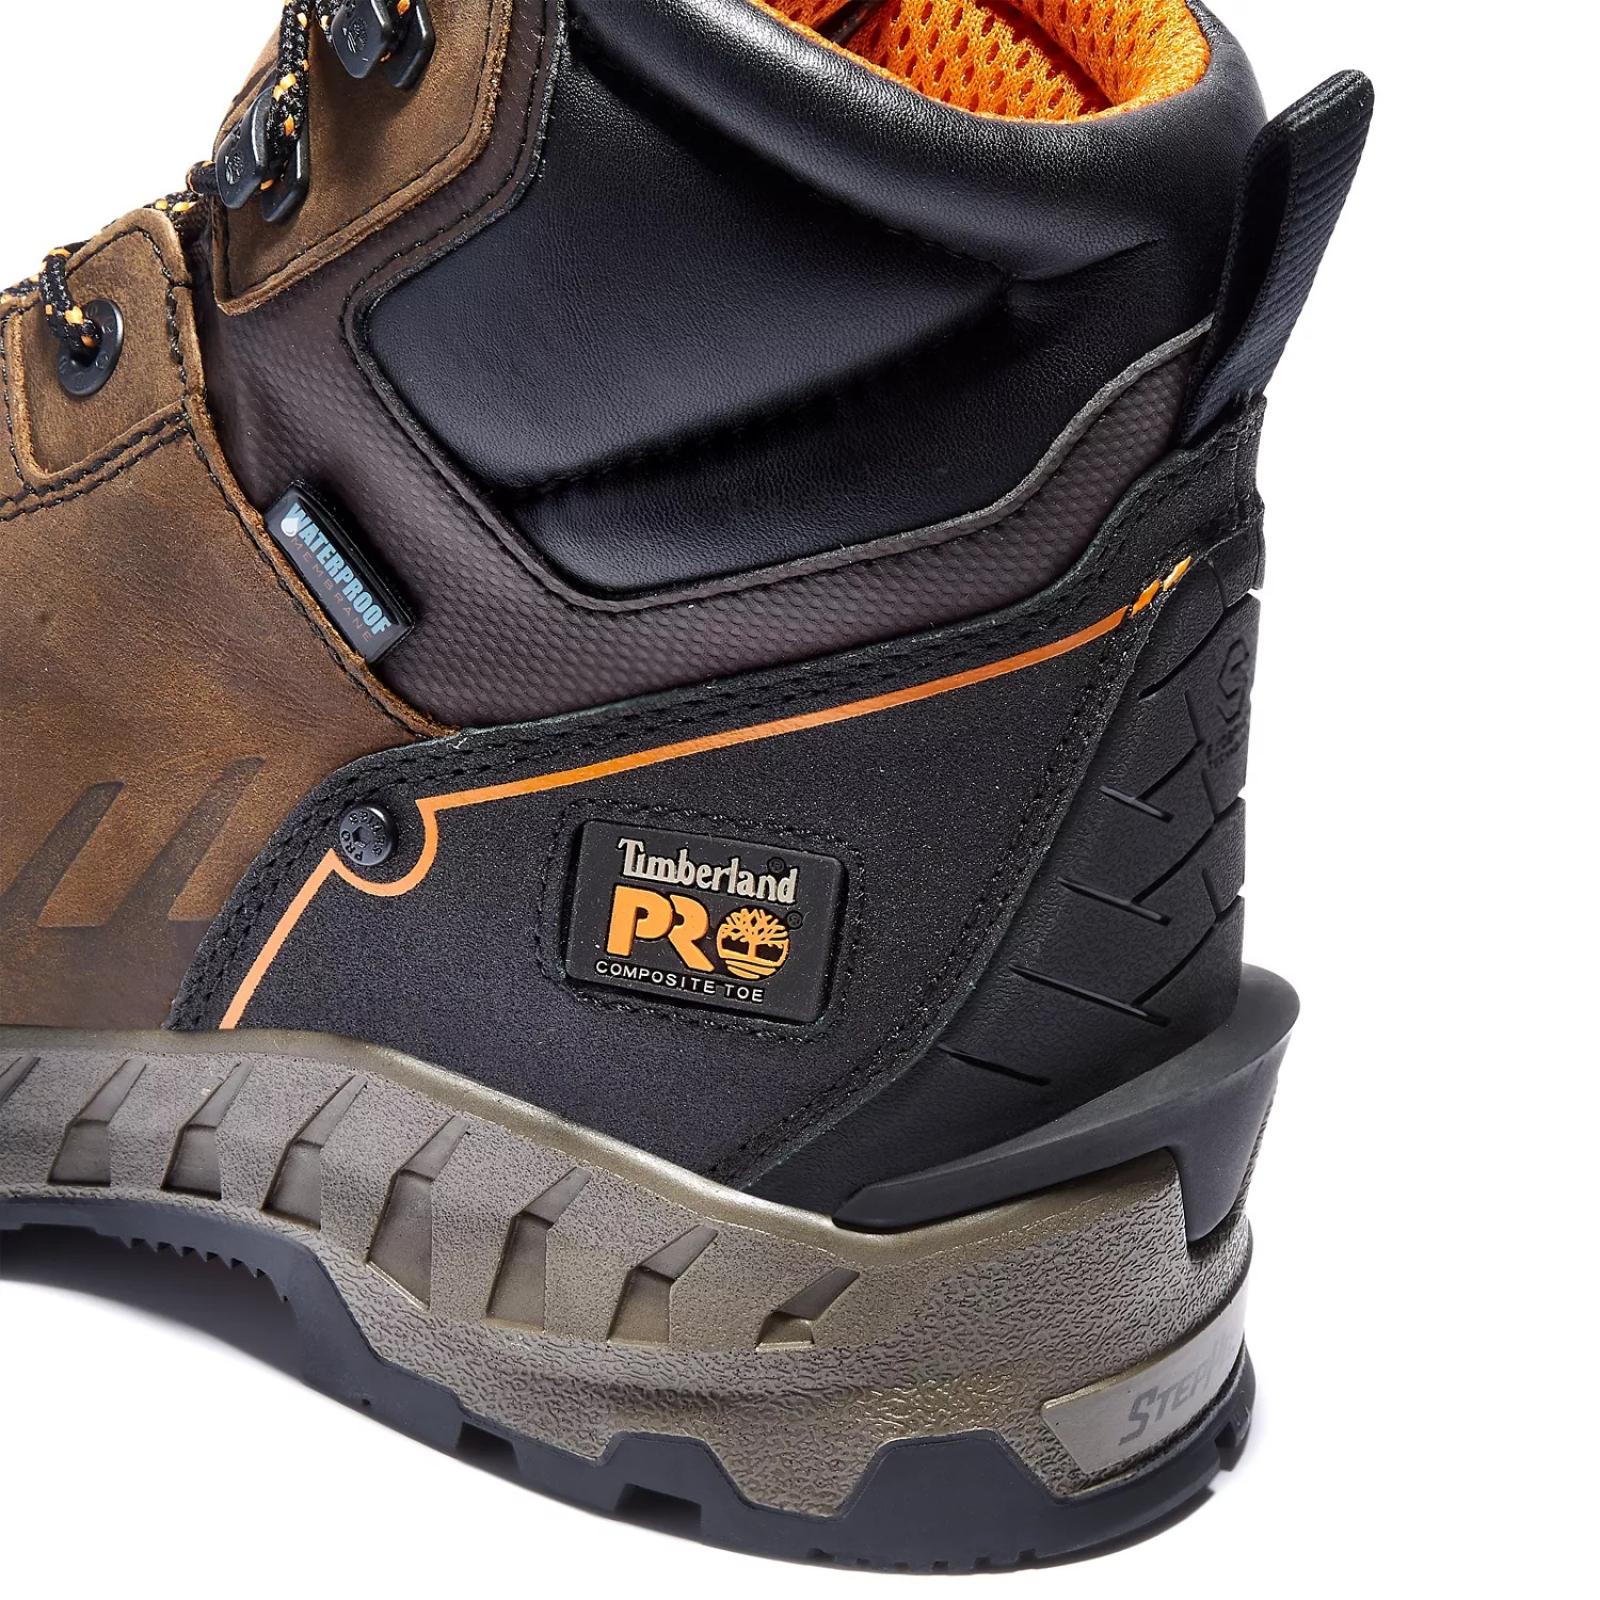 Timberland PRO Men's Summit 6" Composite Toe Work Boots